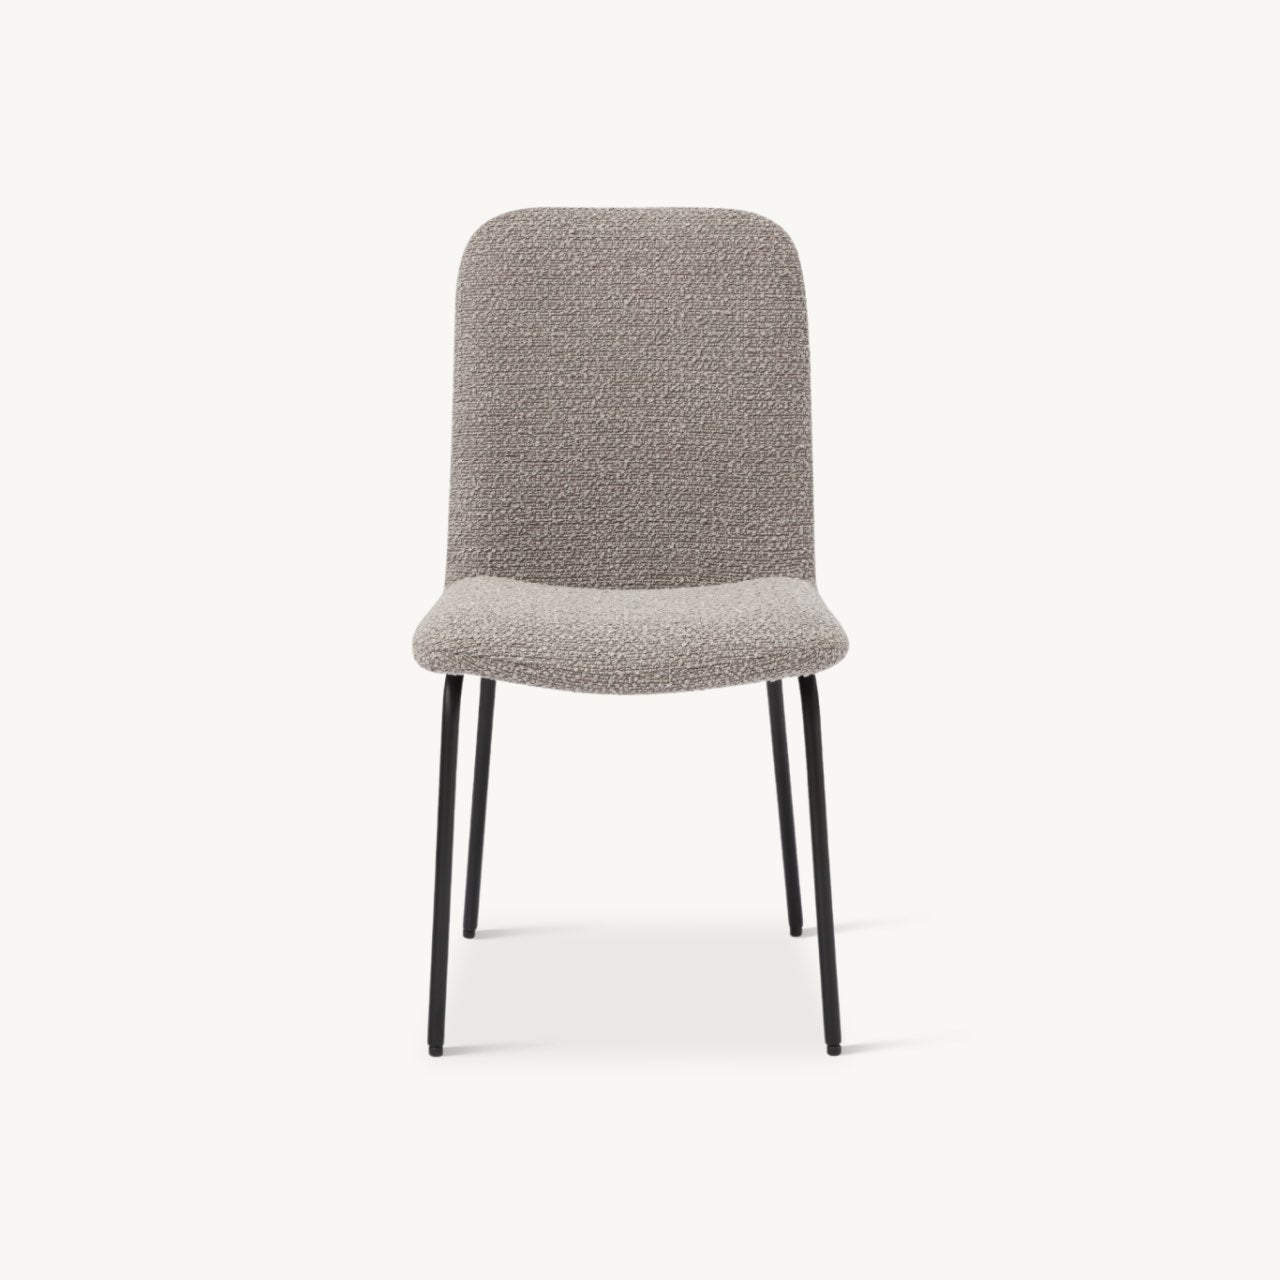 comfortable, simple, modern dining chair upholstered in grey boucle fabric 